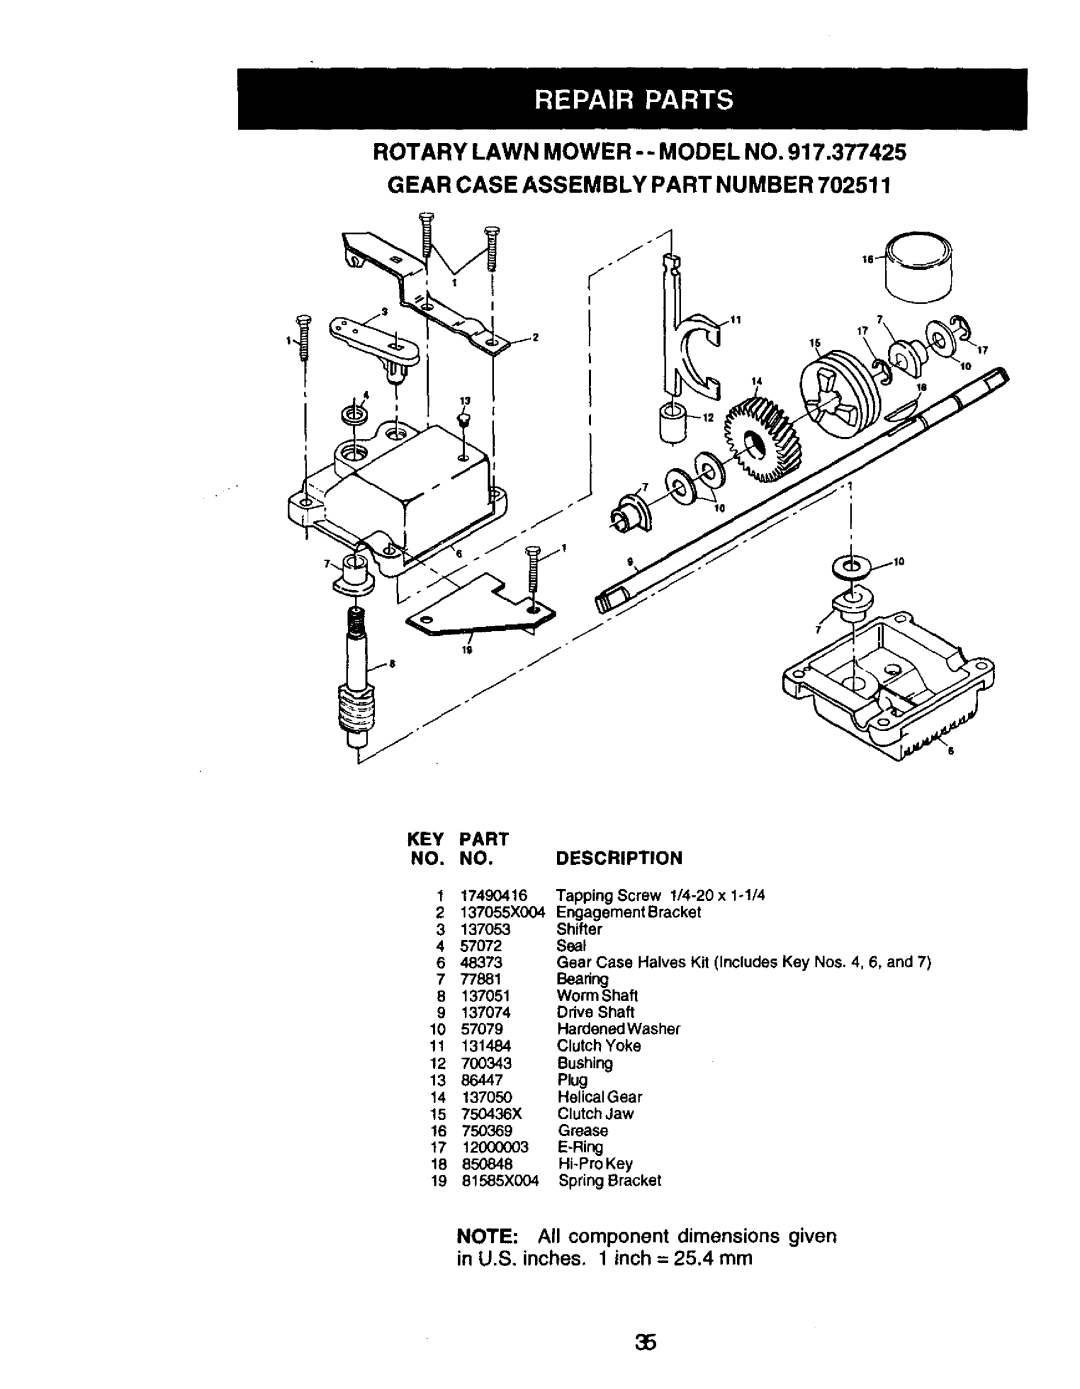 Craftsman 917.377425 owner manual Rotary Lawn Mower -- Model No, Gear Case Assembly Part Number, Description 